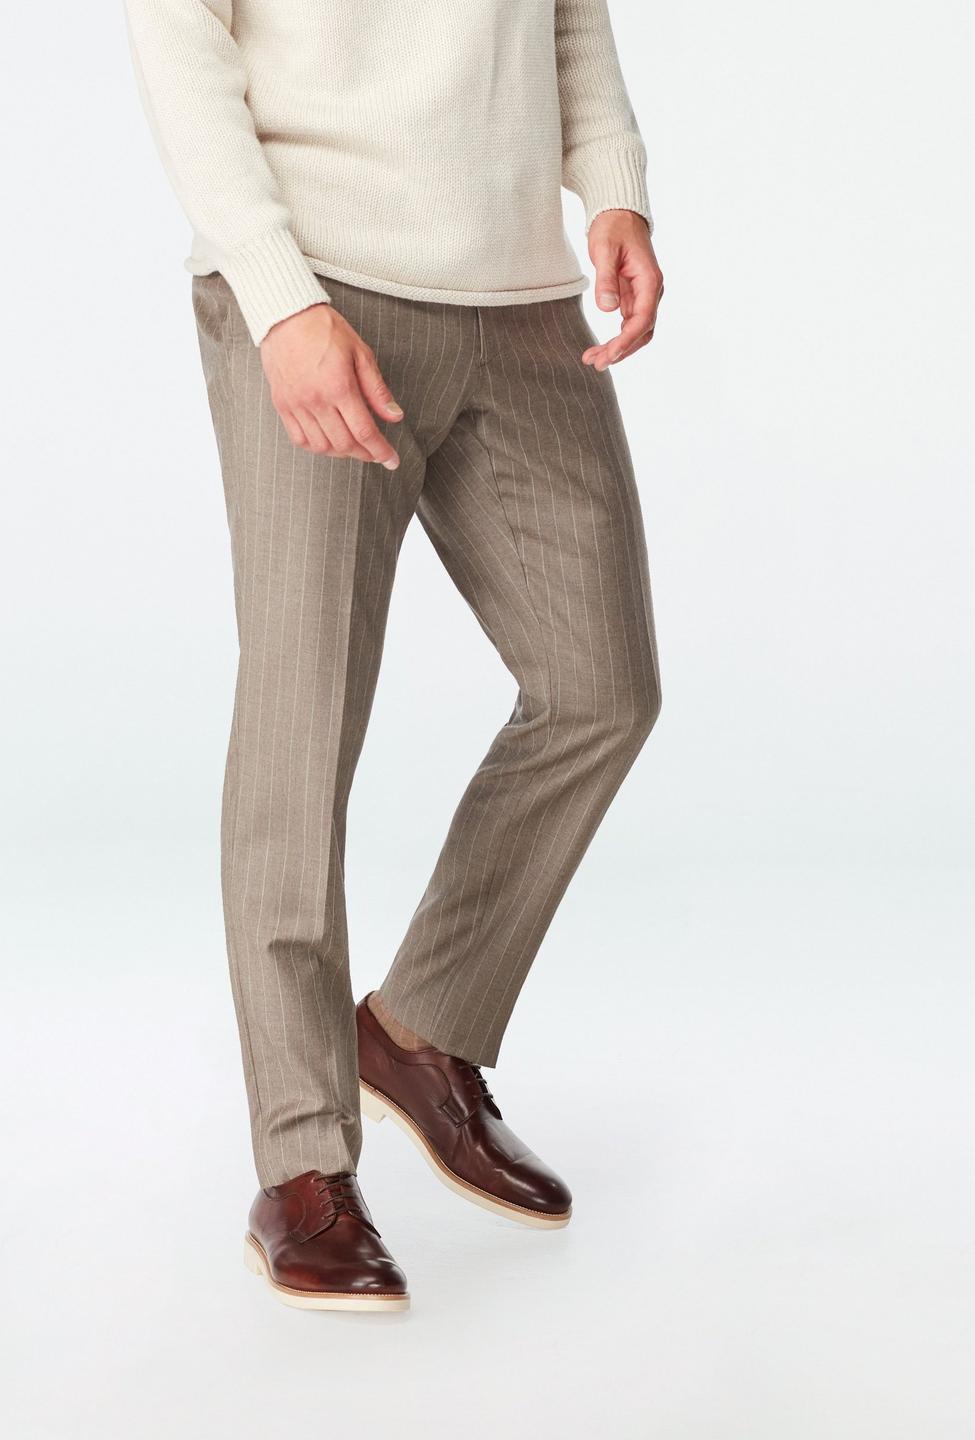 Brown pants - Reigate Striped Design from Seasonal Indochino Collection